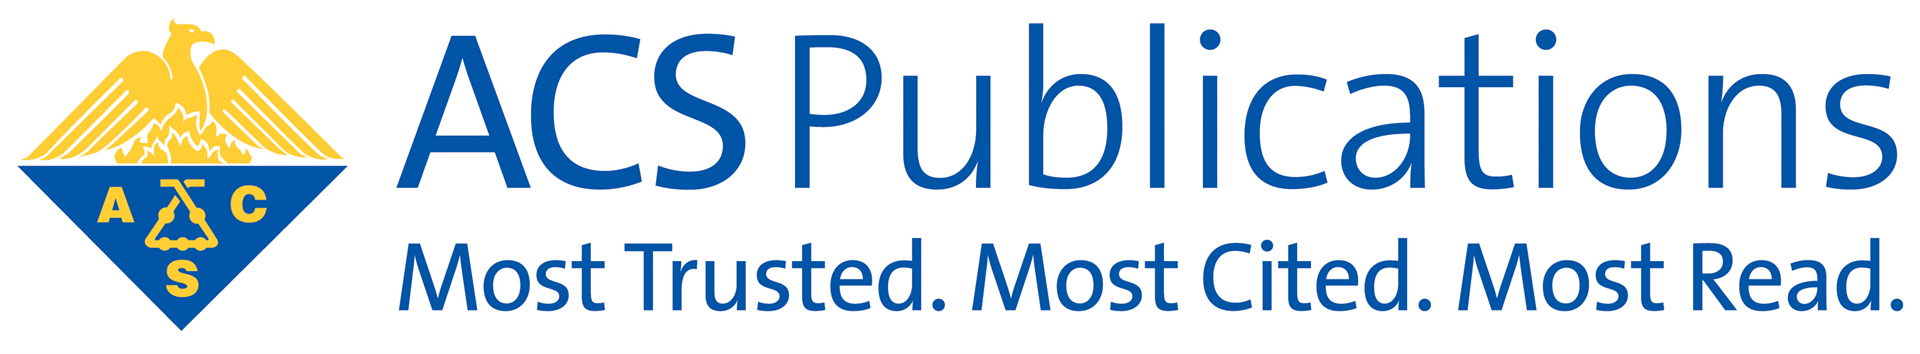 ACS Publications logo "Most Trusted. Most Cited. Most Read."